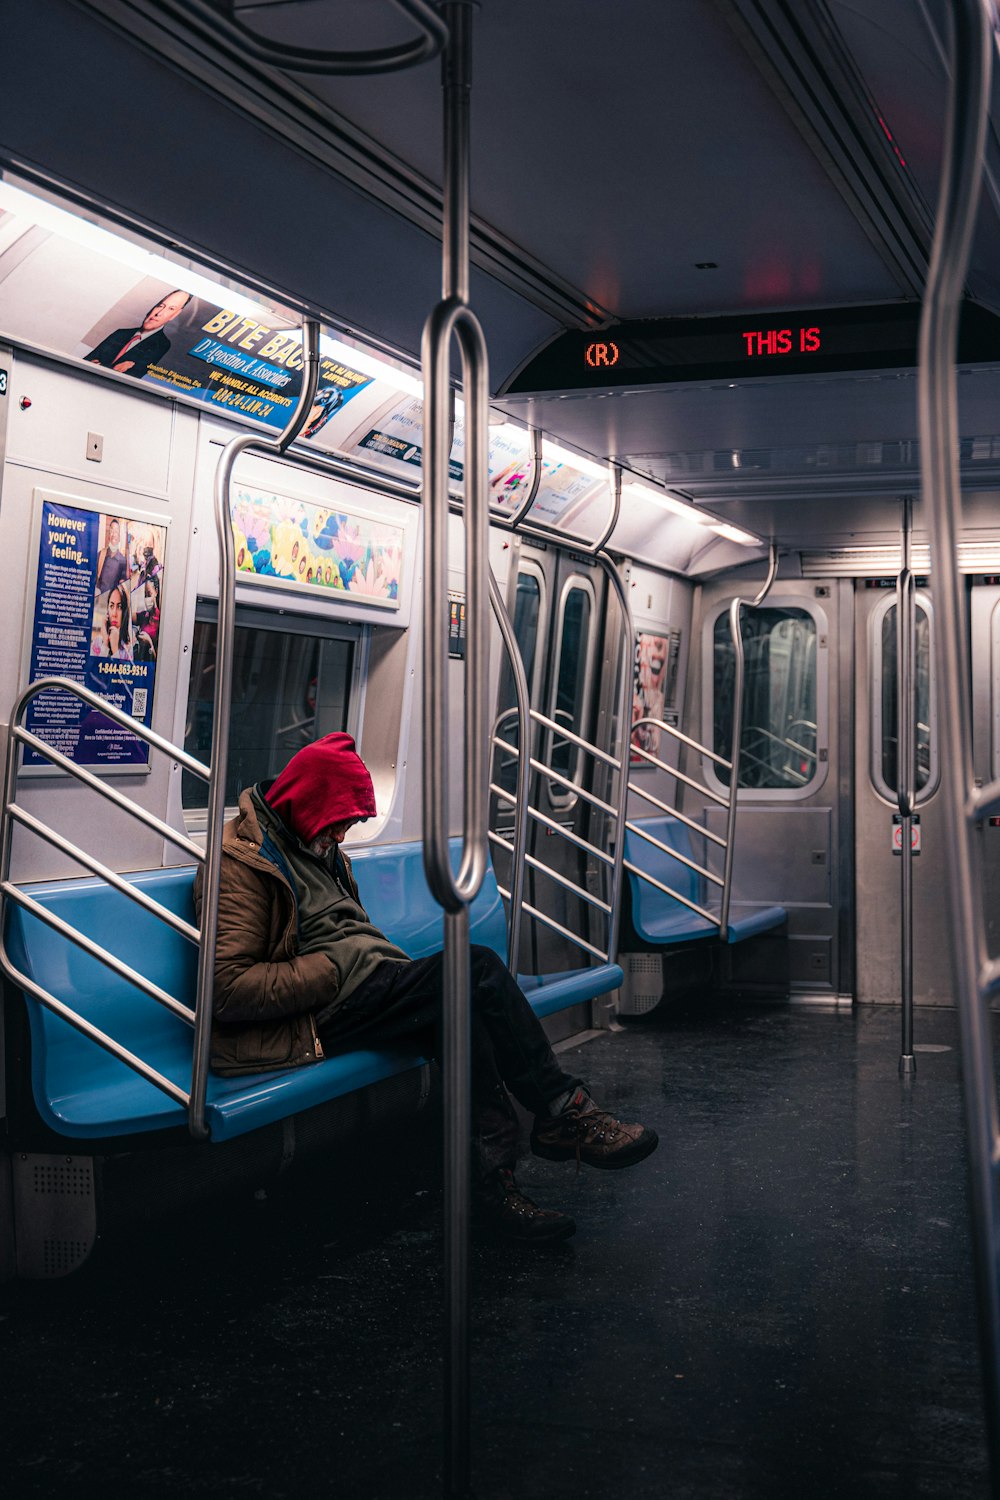 a person wearing a red hat sitting on a subway